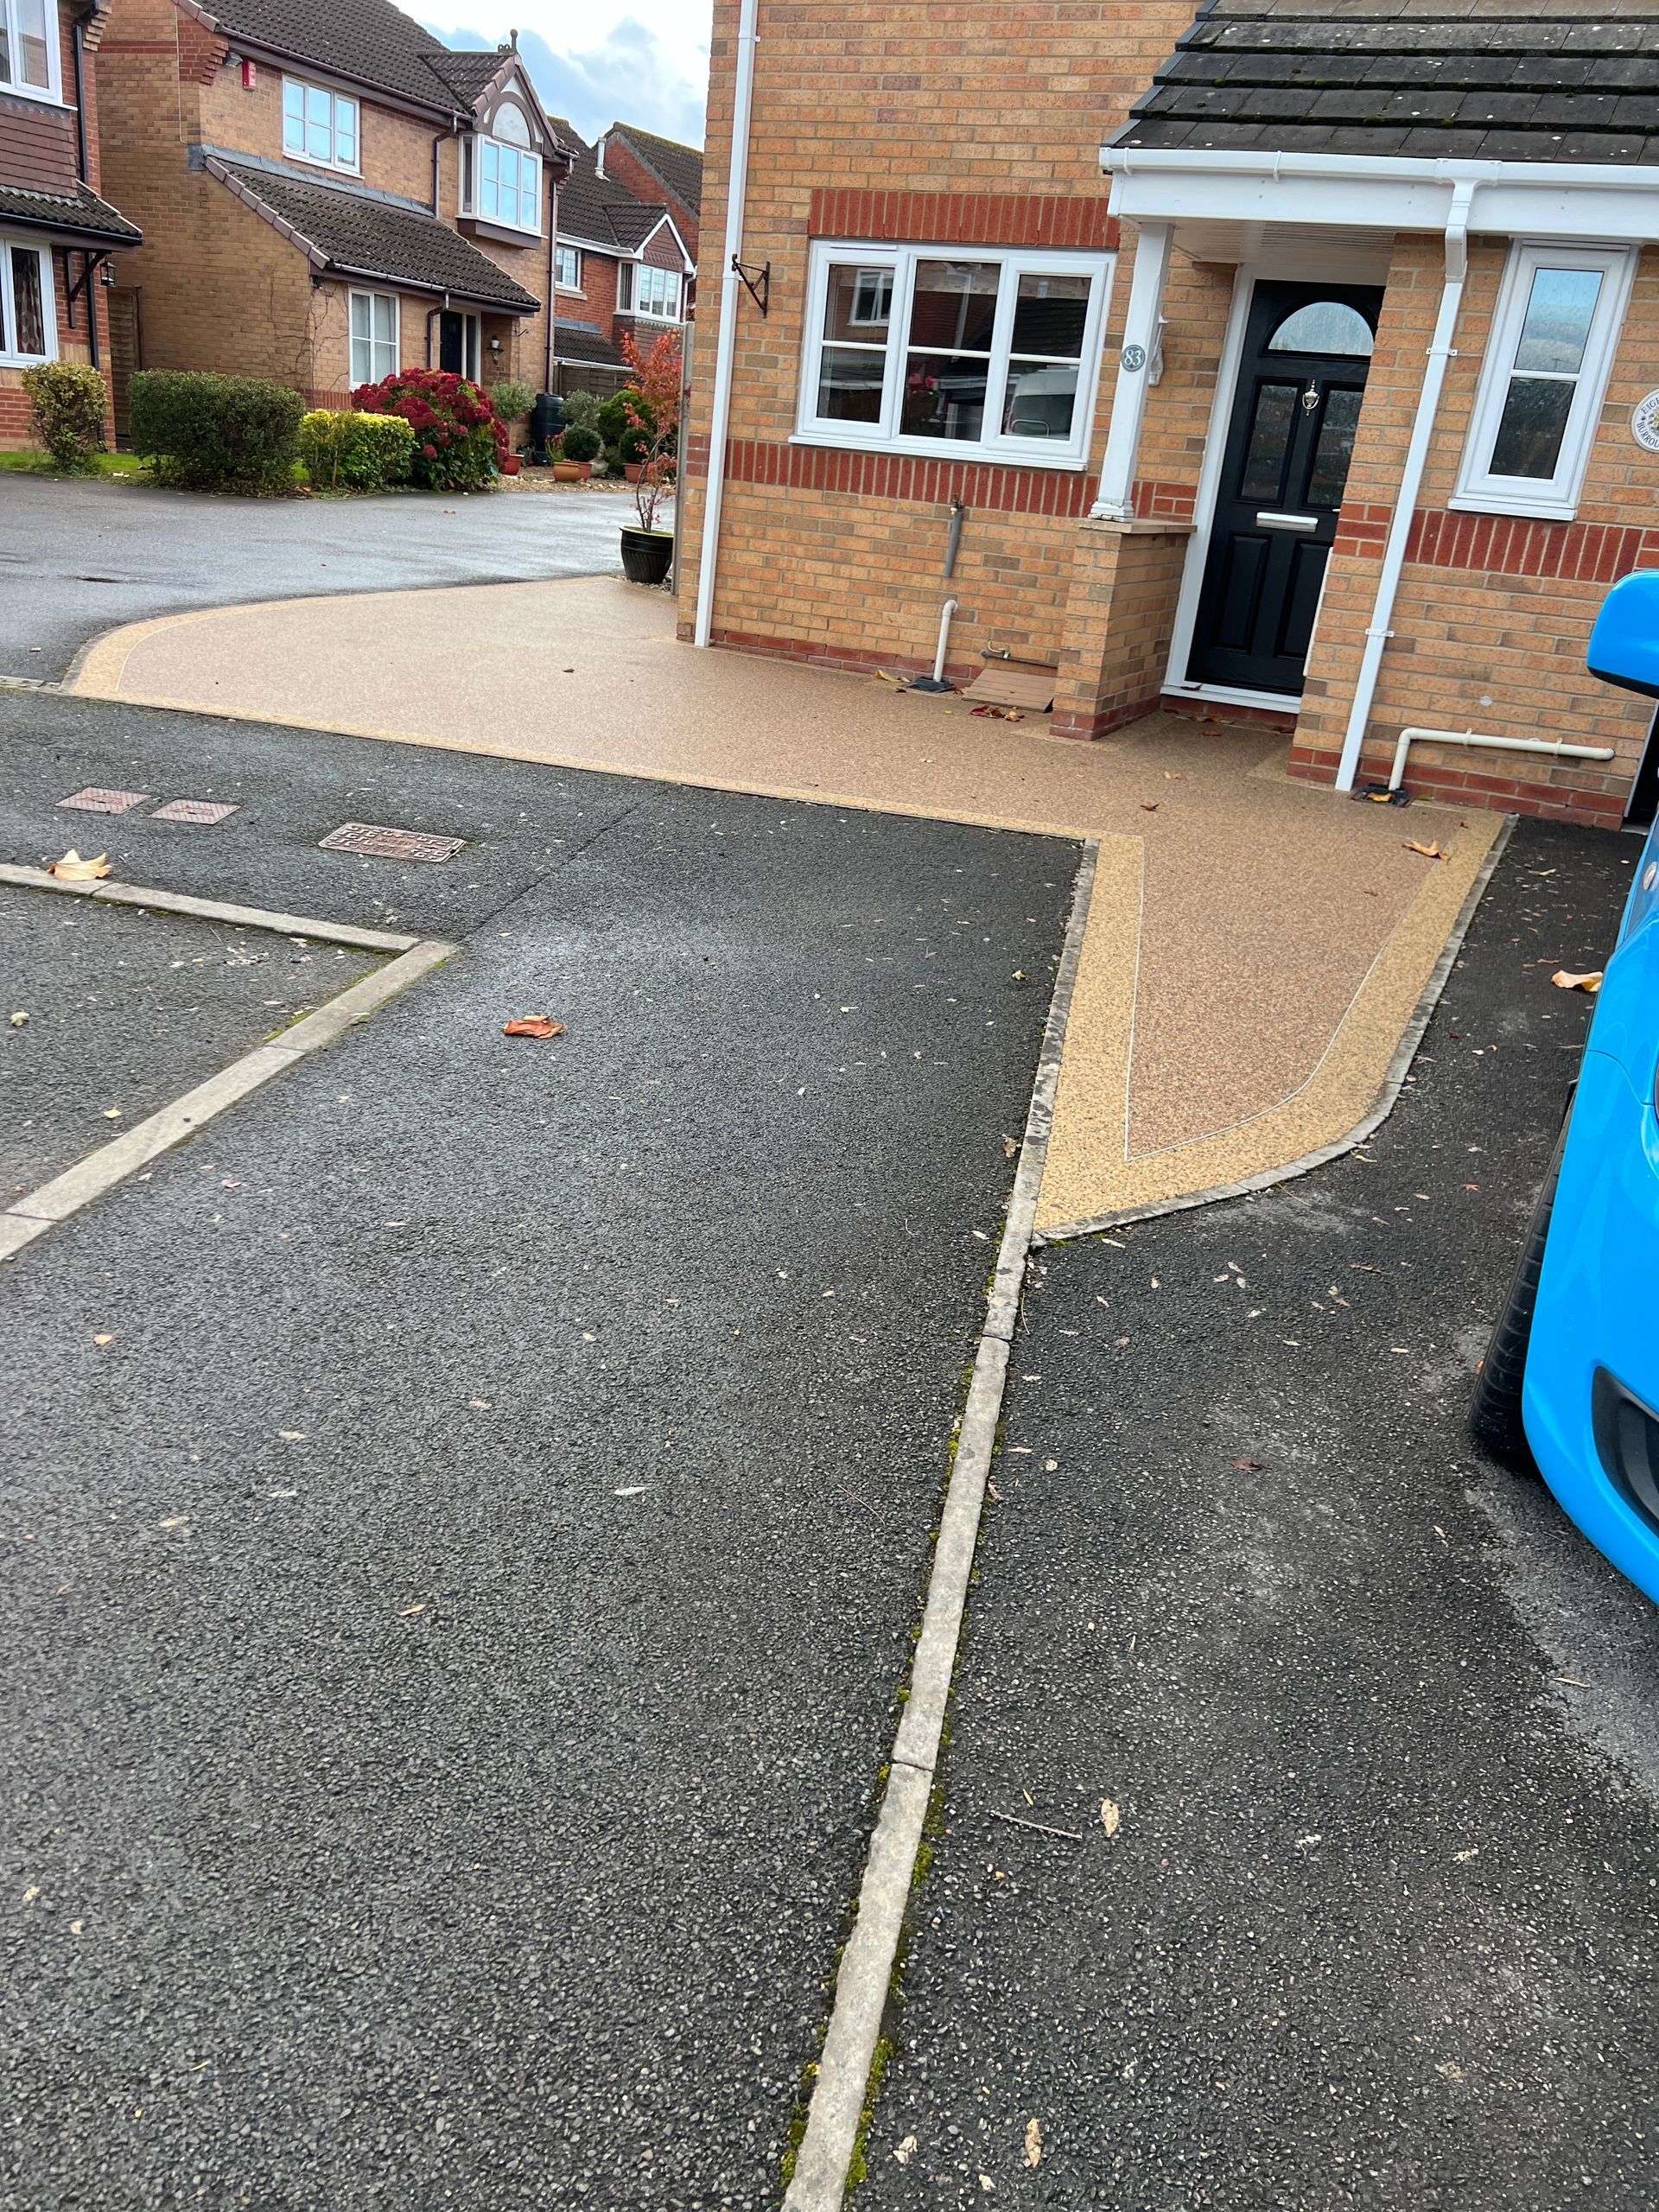 Grey tarmac road next to a newly installed beige resin pathway outside a brick house.